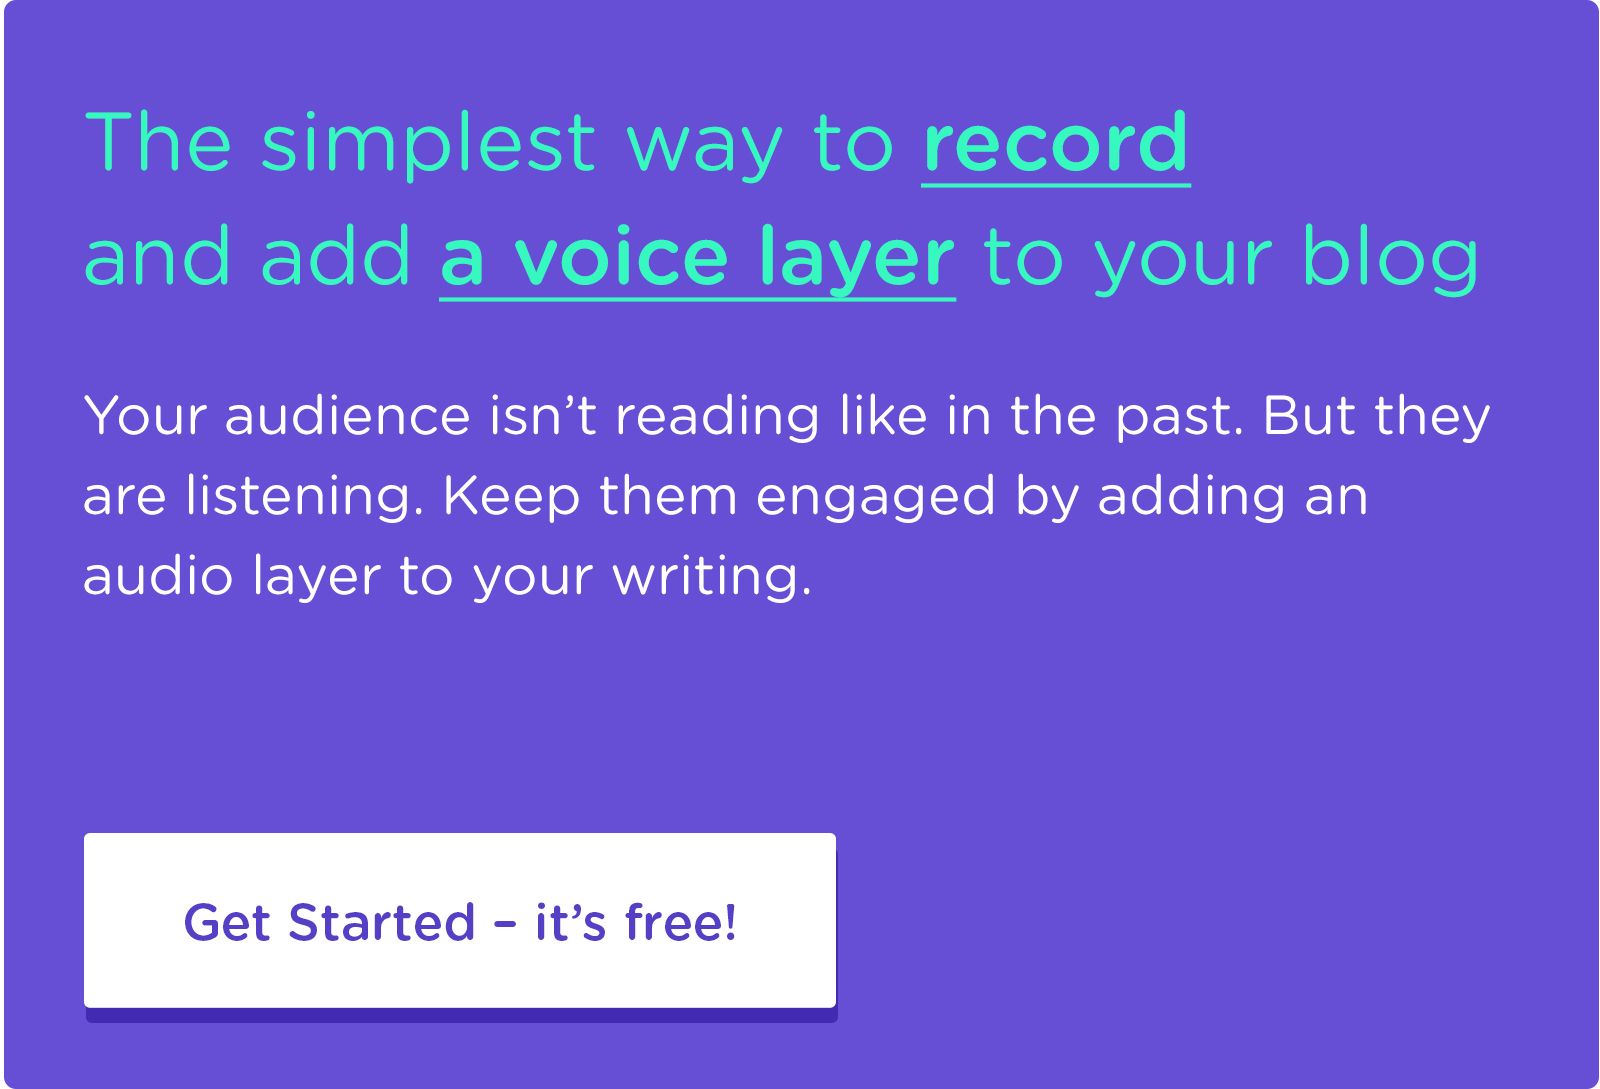 Tips for Engaging Your Audience with Audio